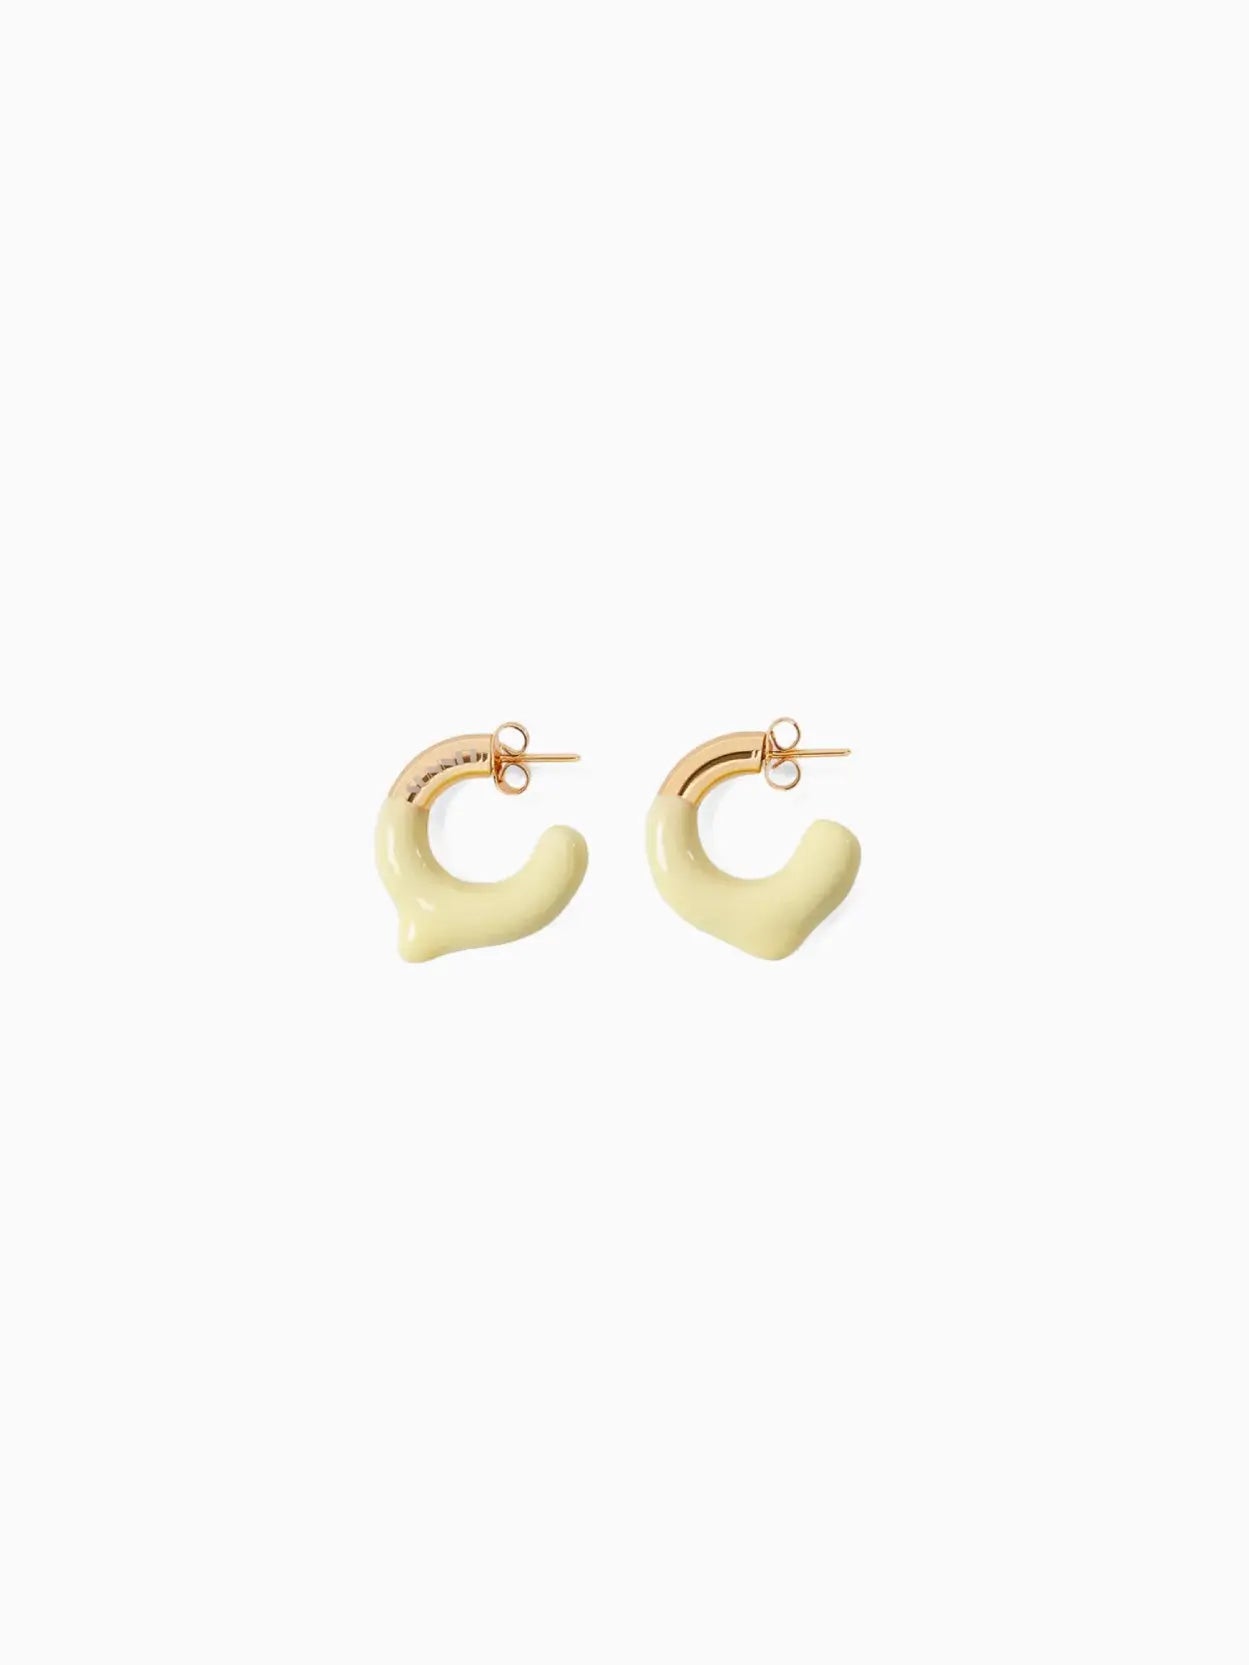 A pair of contemporary Rubberized Small Earrings by Sunnei featuring a unique, smooth, abstract shape. The earrings have a gold-toned attachment with a yellowish, irregularly curved resin design, giving them a modern and artistic appearance. Available at BassalStore in Barcelona. The background is plain white.